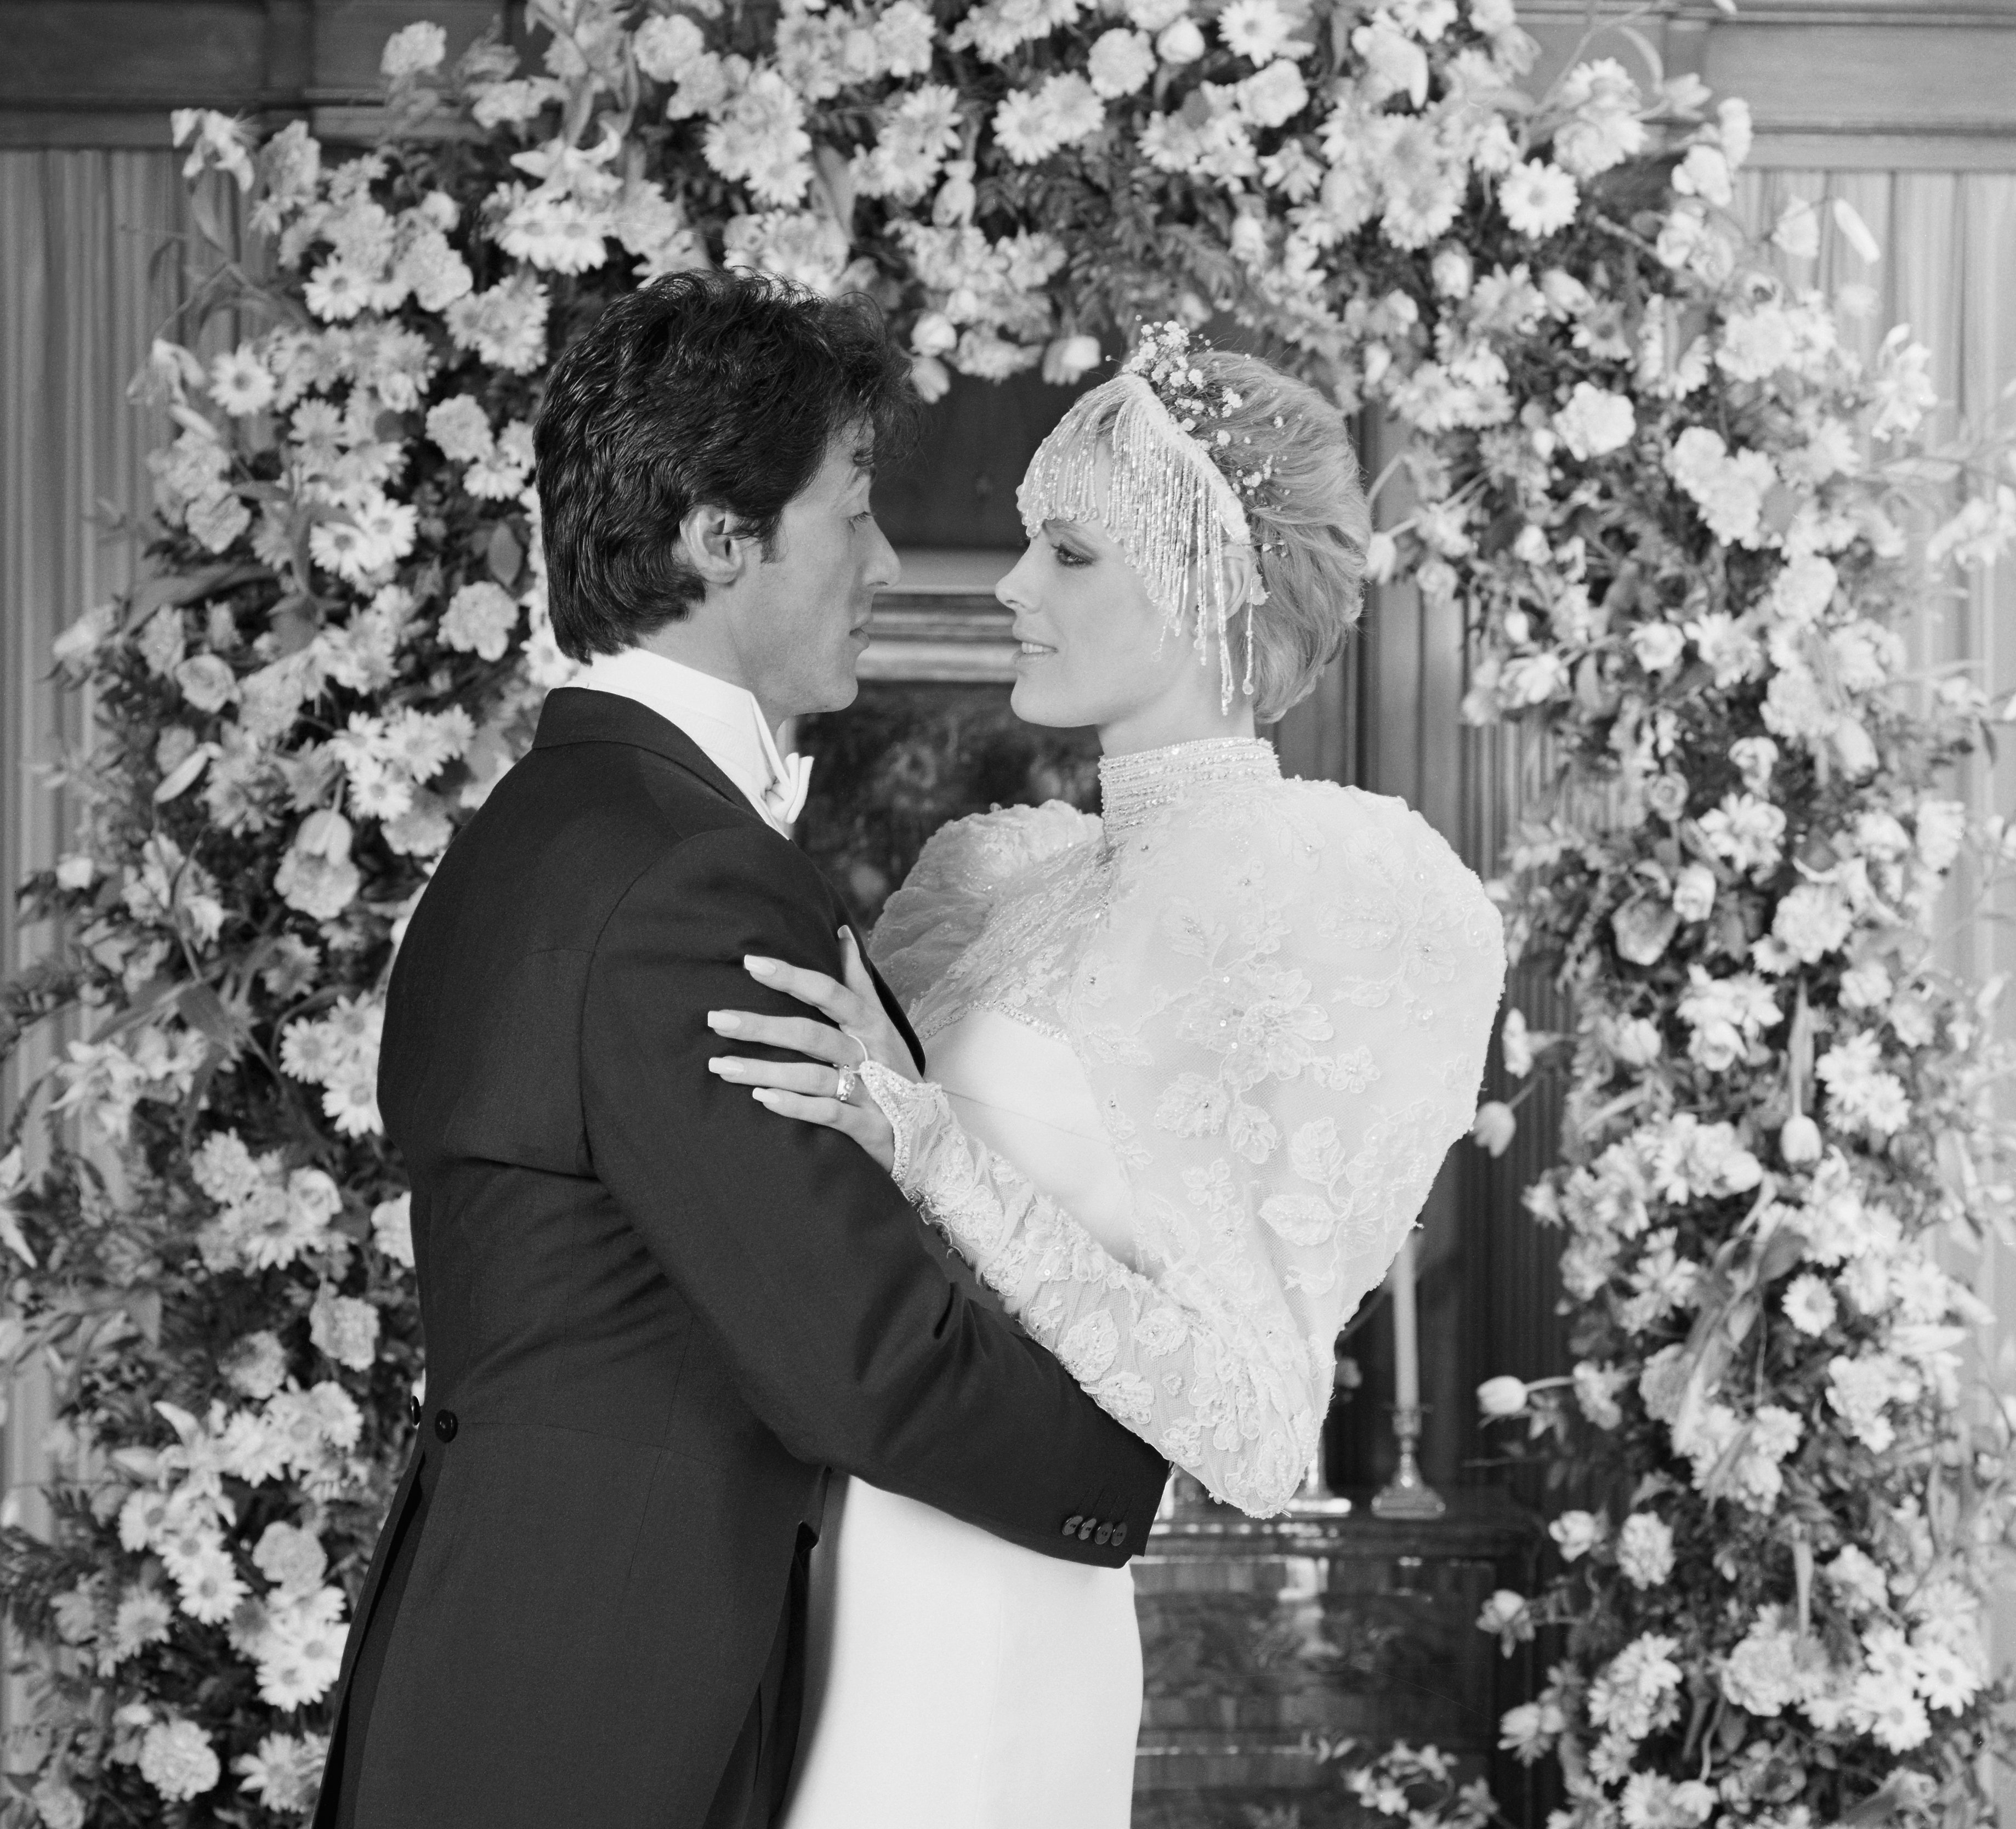 Sylvester Stallone and Brigitte Nielsen on their wedding day in Beverly Hills 1985. | Source: Getty Images